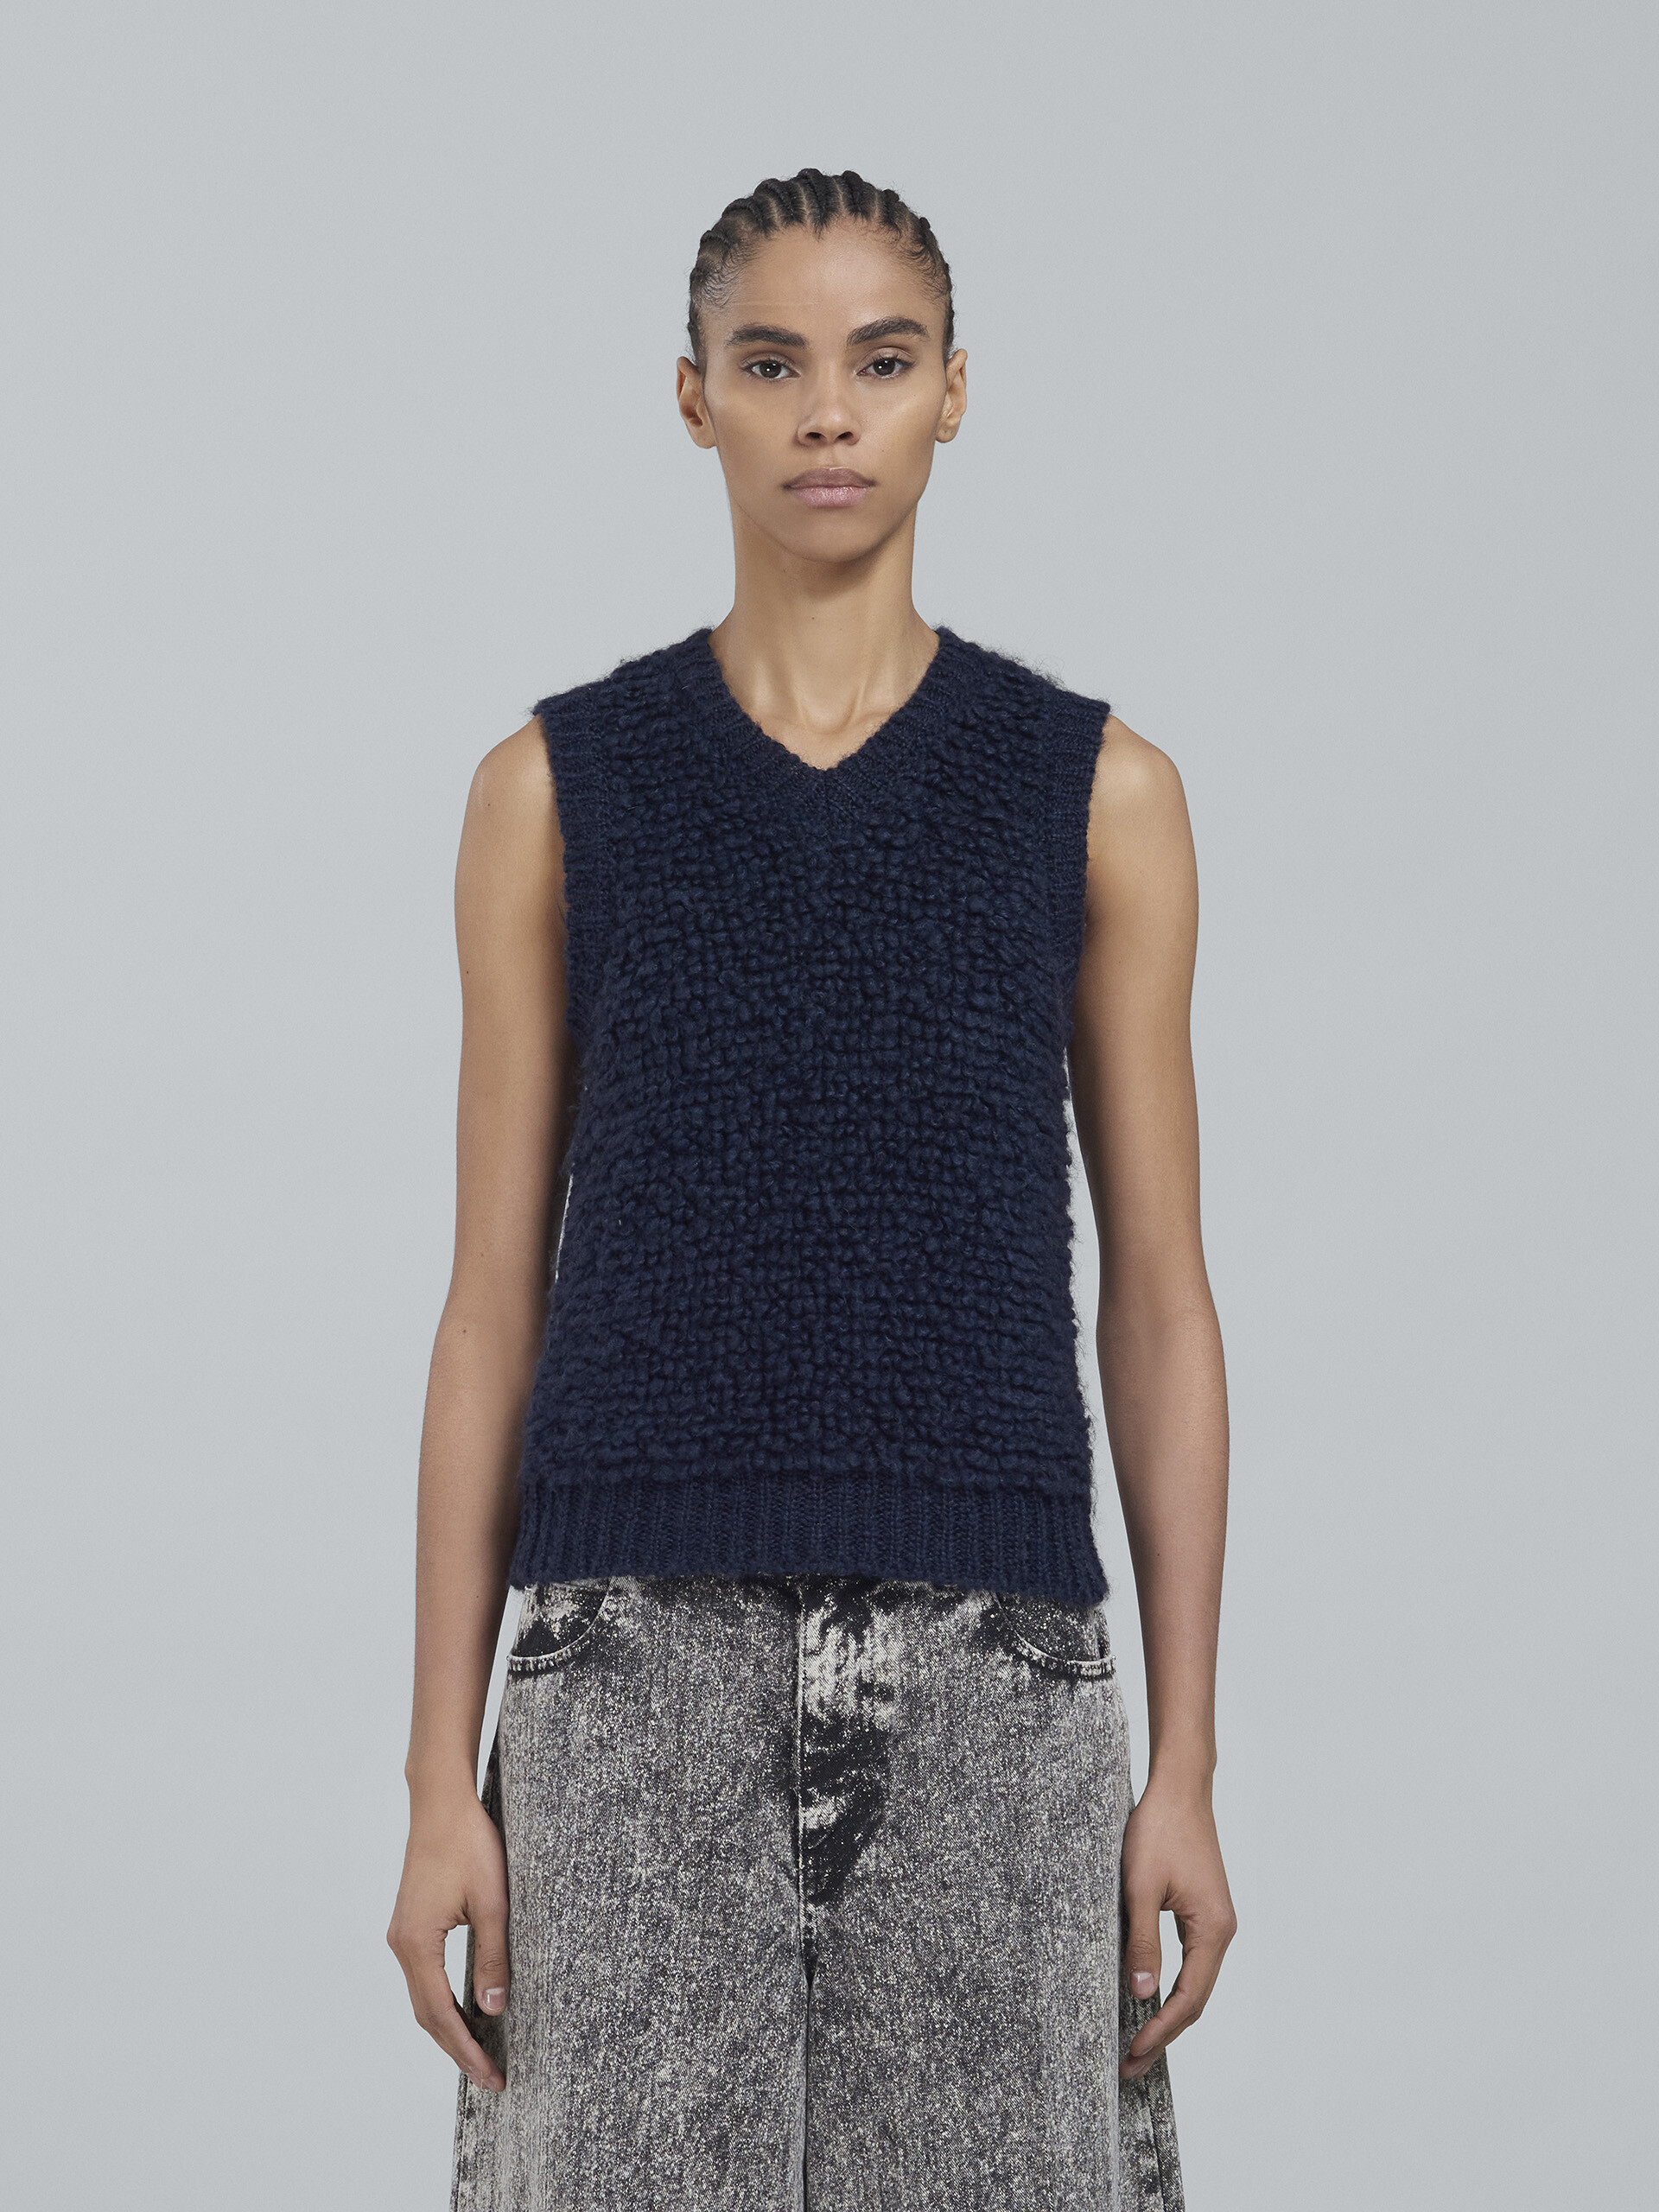 Gilet in mohair - Pullover - Image 2